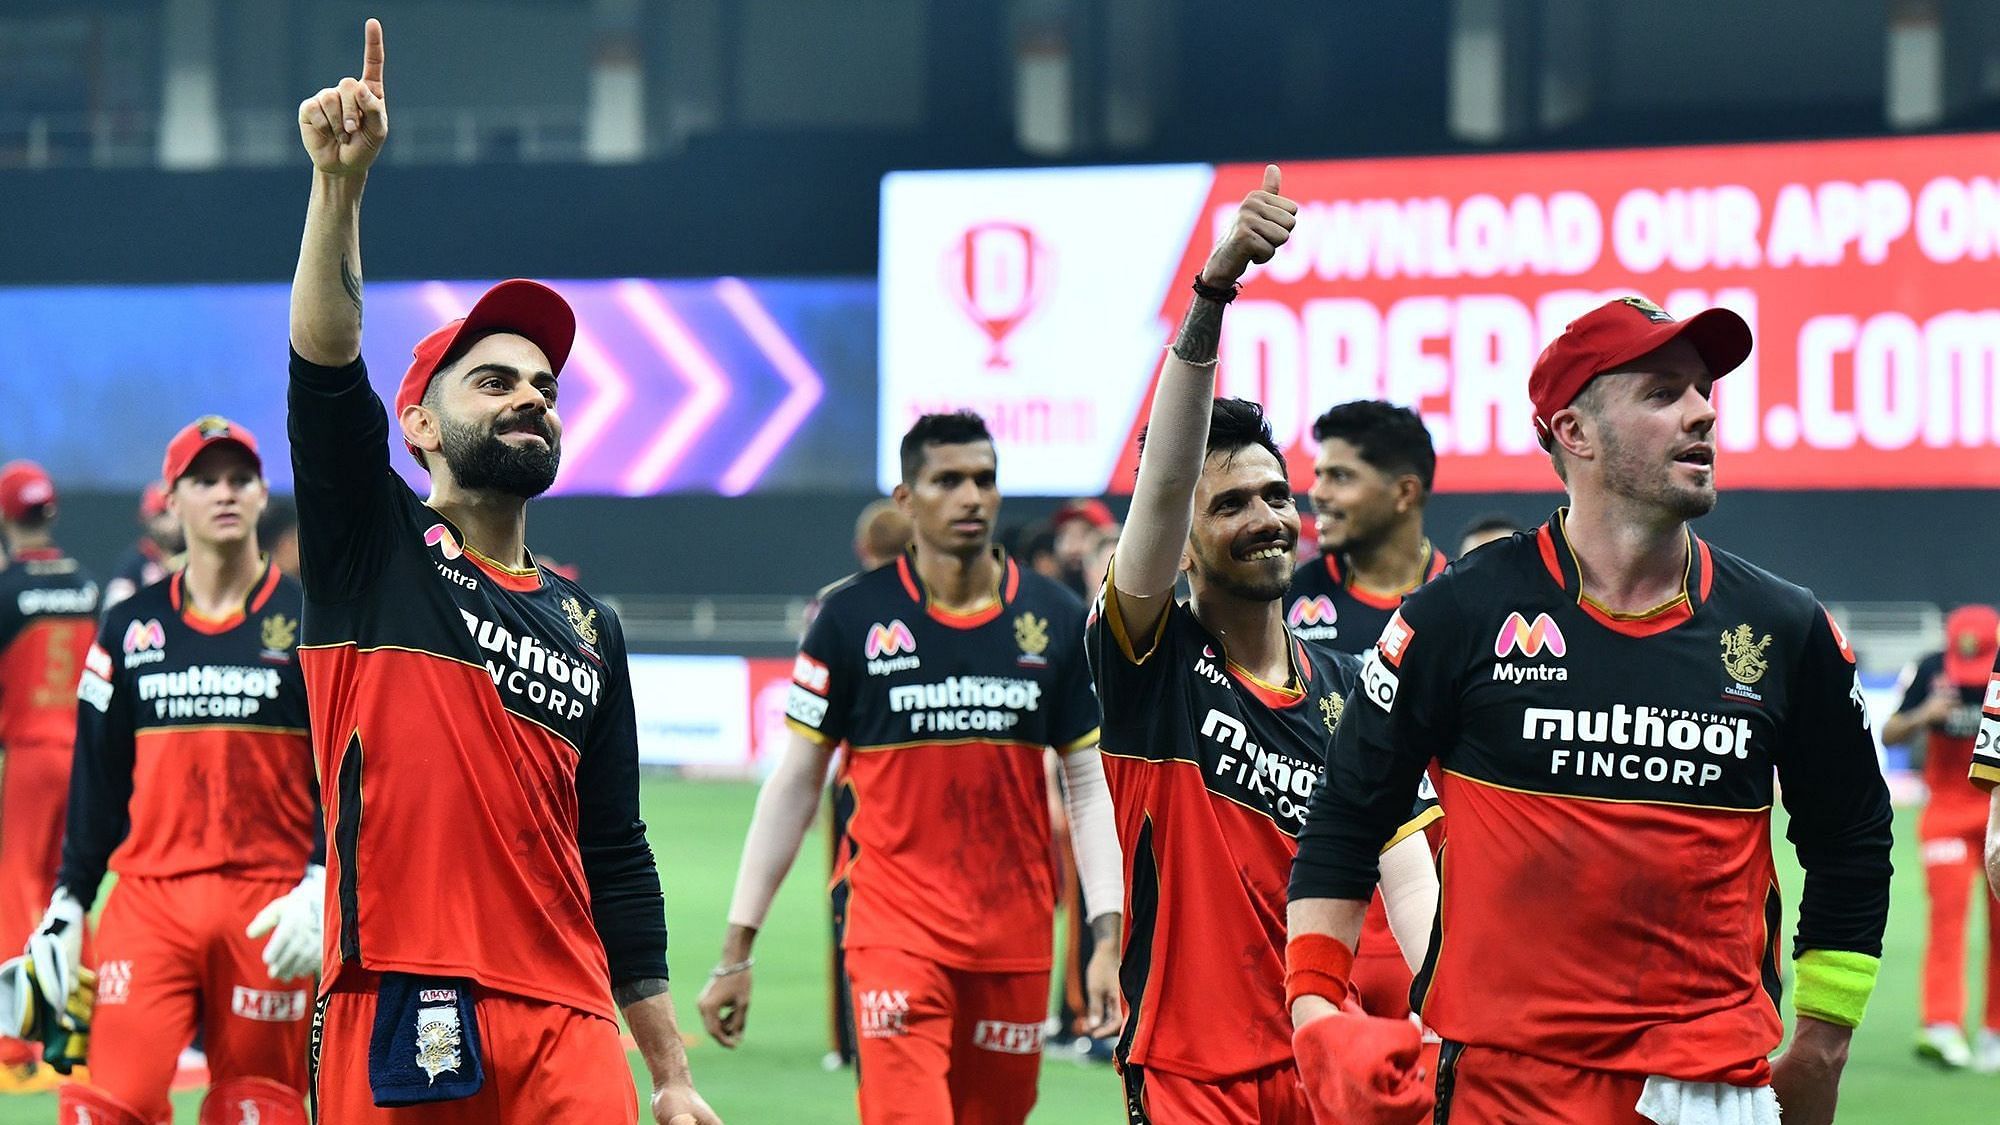 Royal Challengers Bangalore, who lost six games in a row in 2019, before their first win, start with a win in IPL 2020.